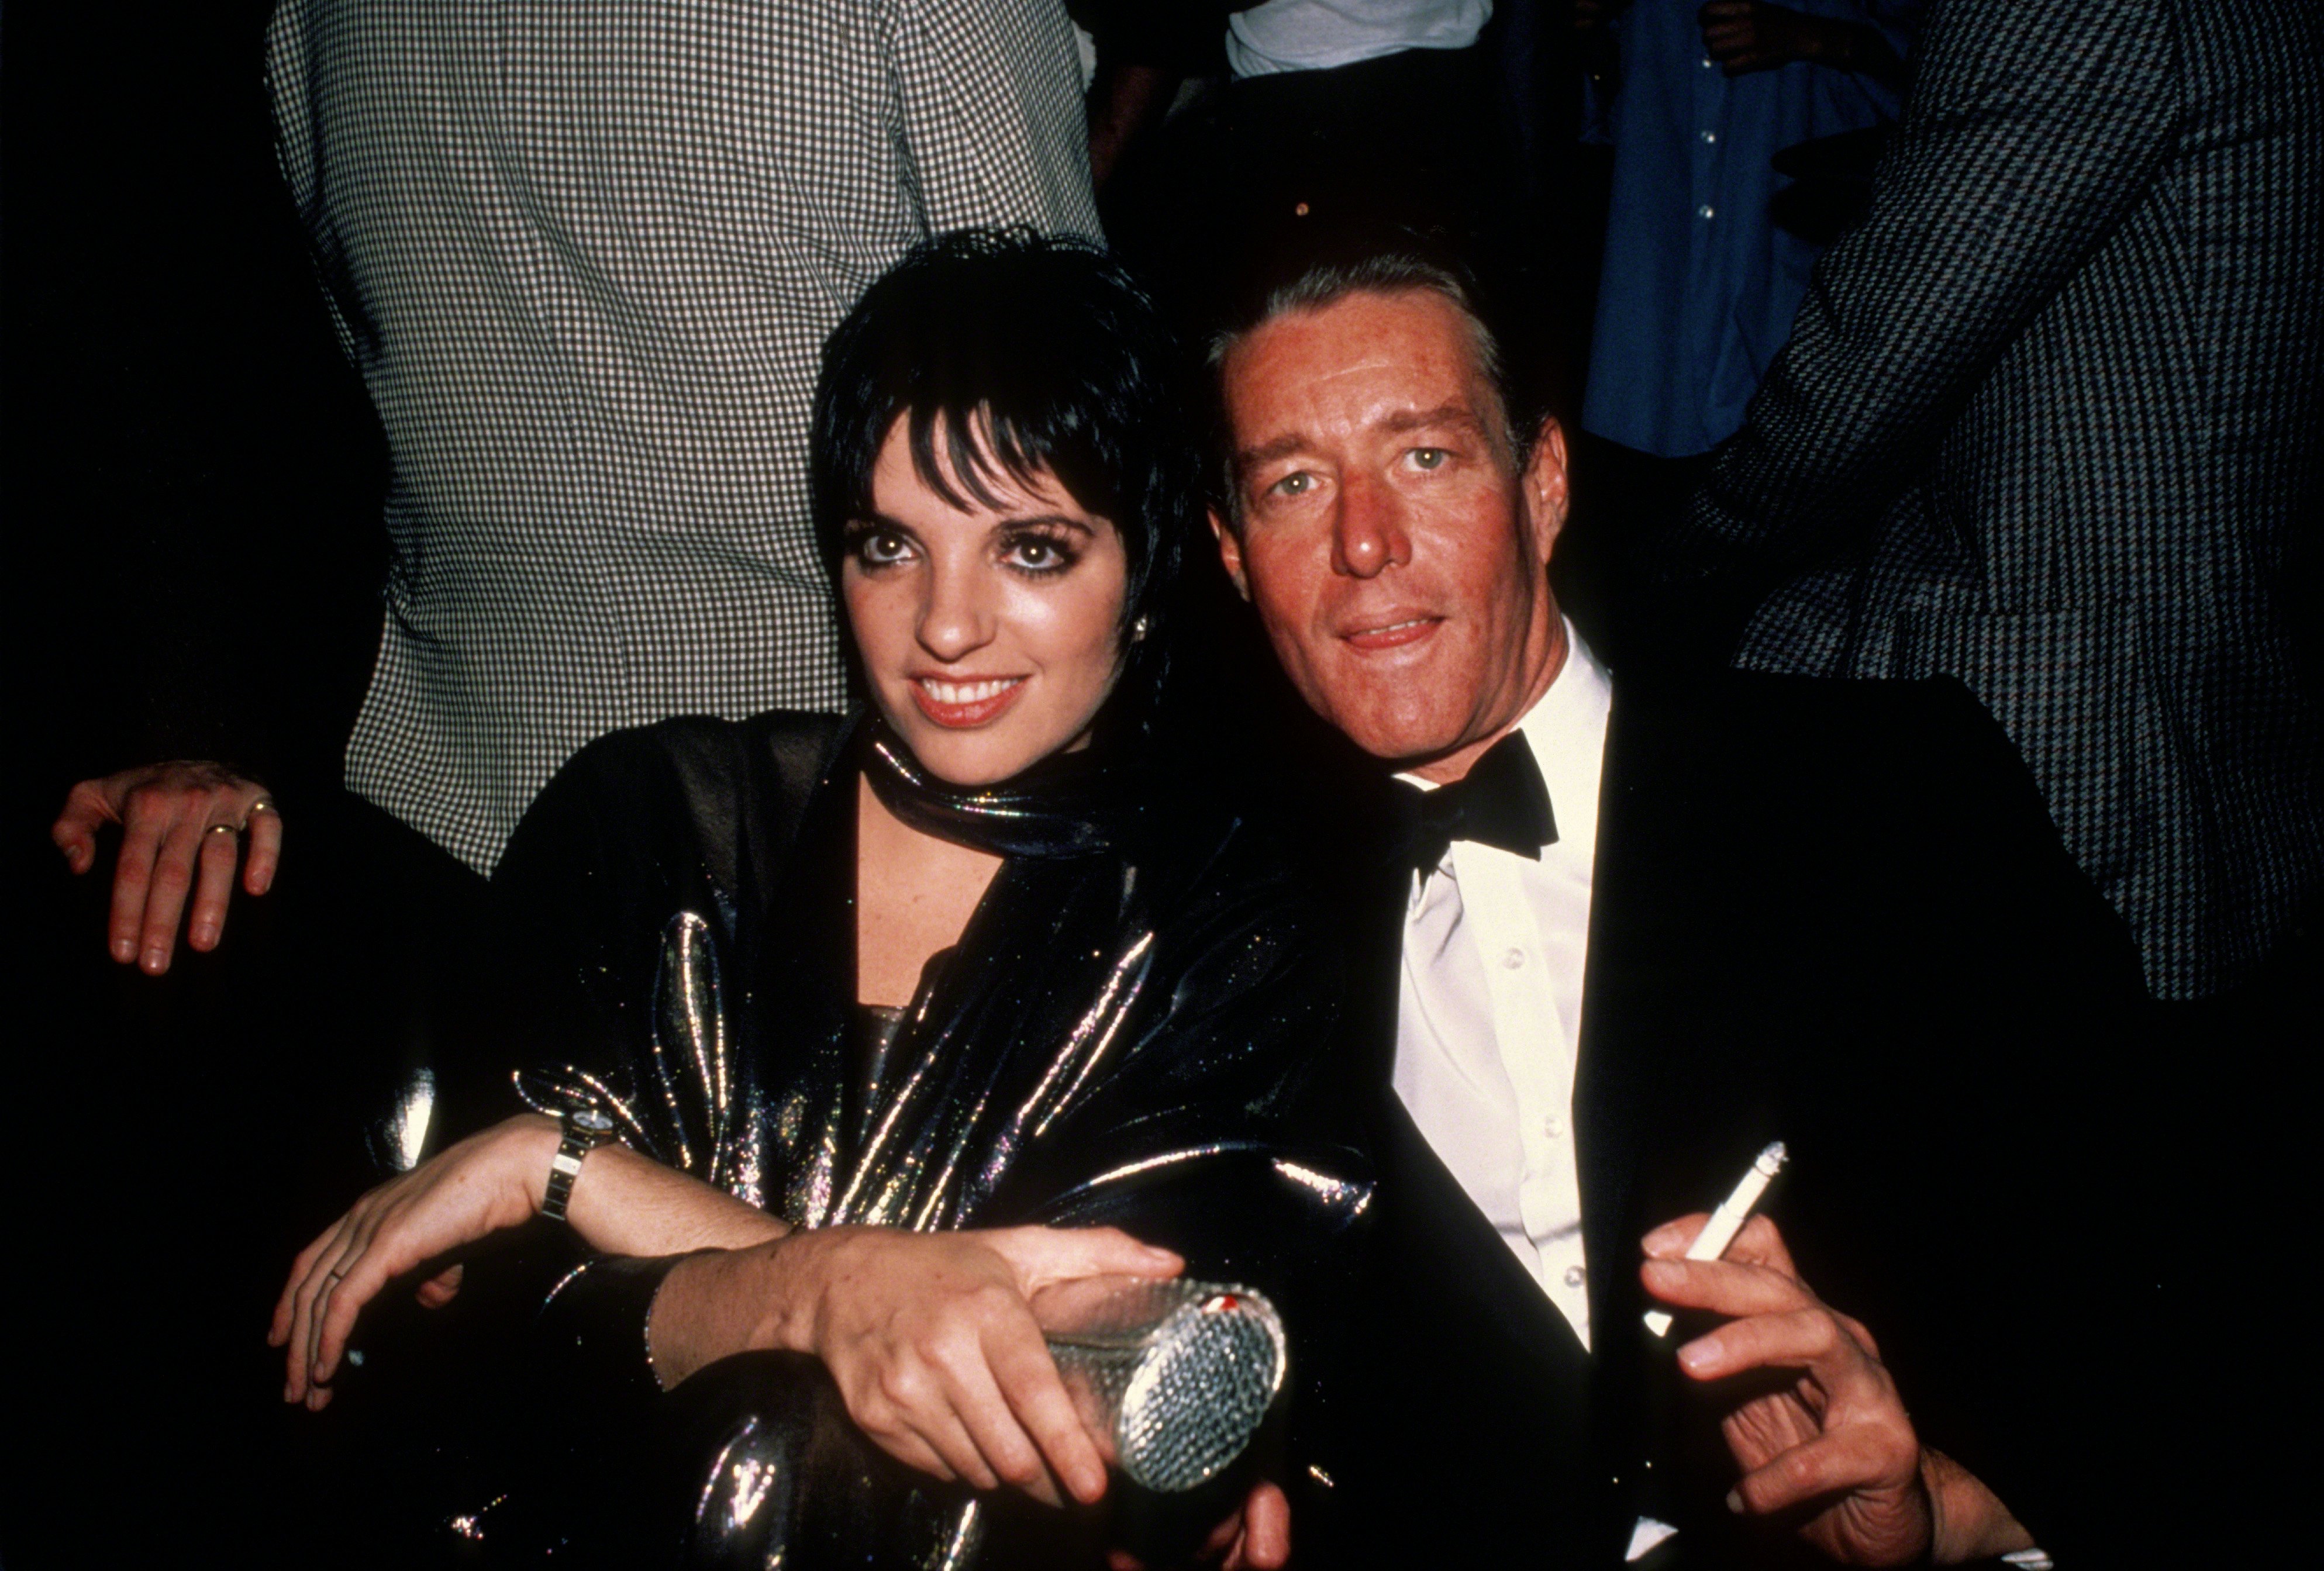 Halston & Liza Minnelli's Real-Life Relationship Was Very Close